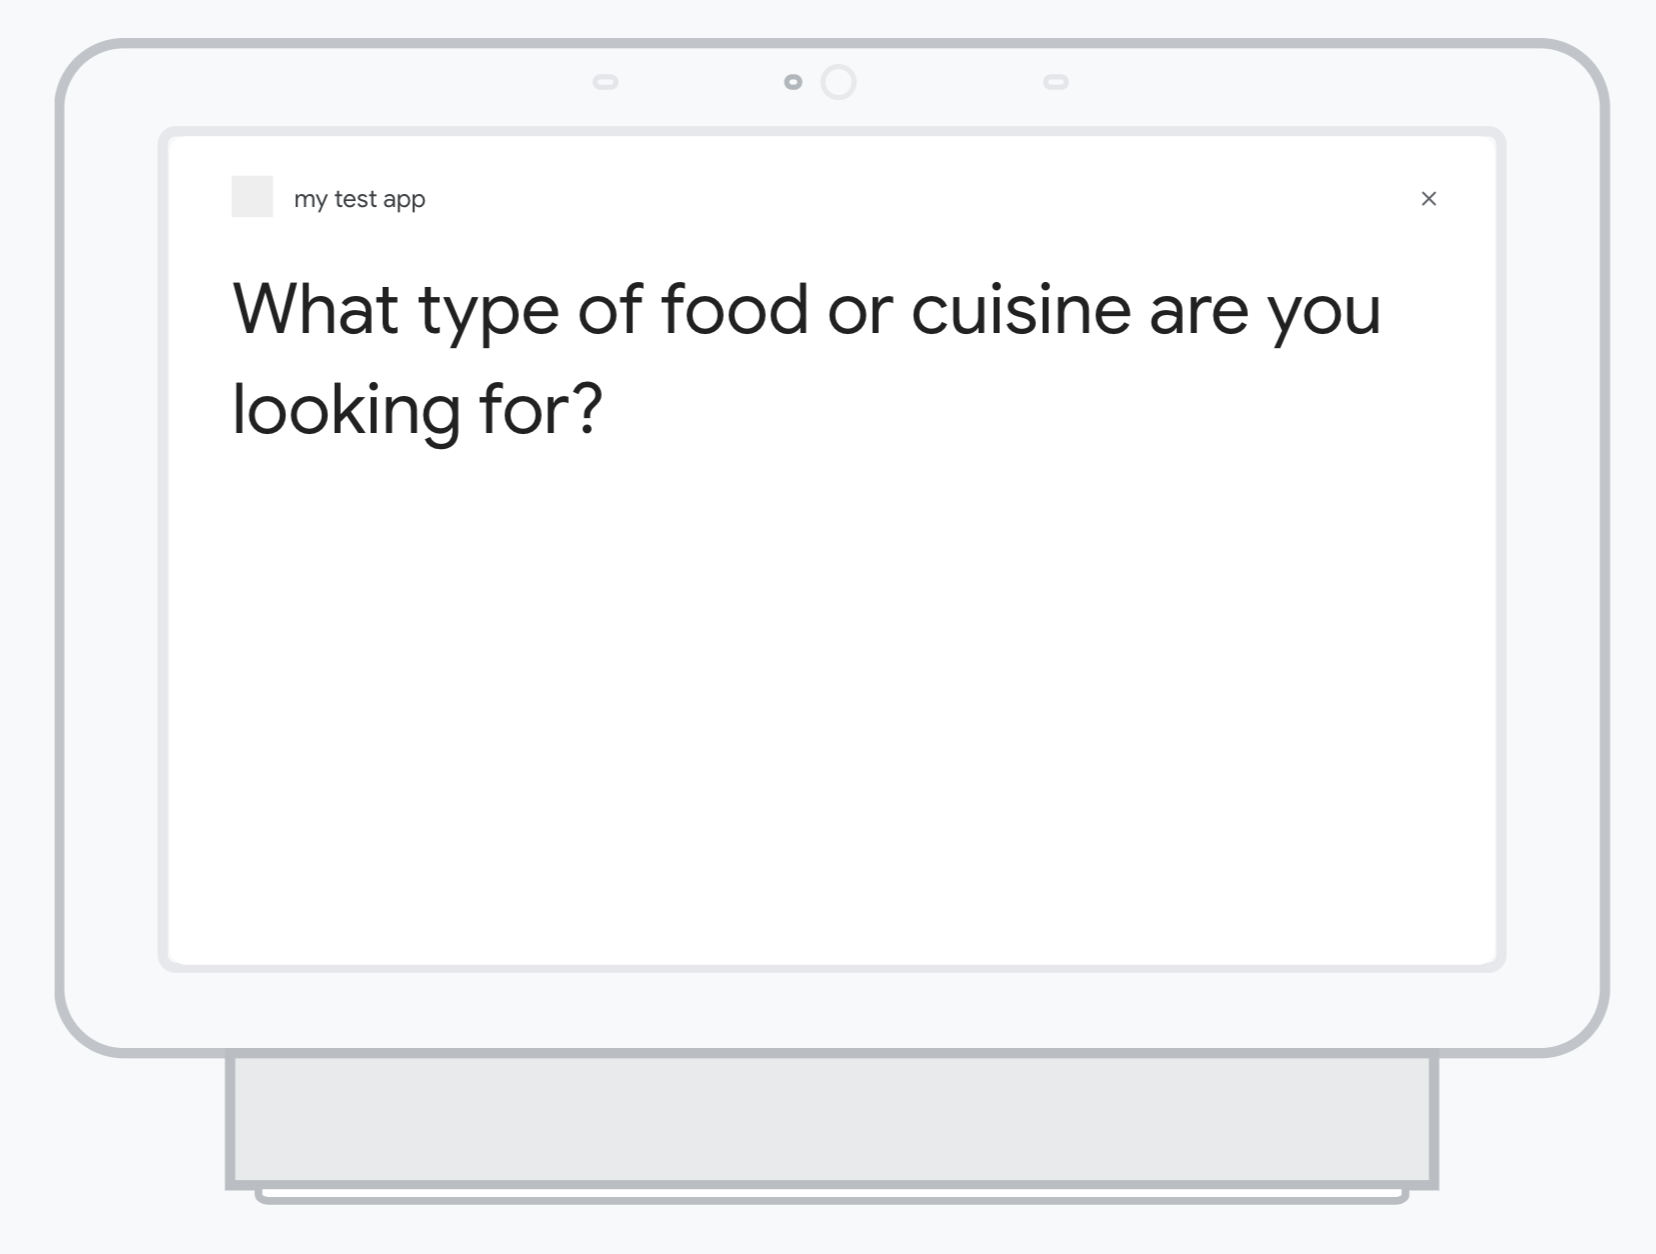 Actions simulator output: What type of food or cuisine are you looking for?